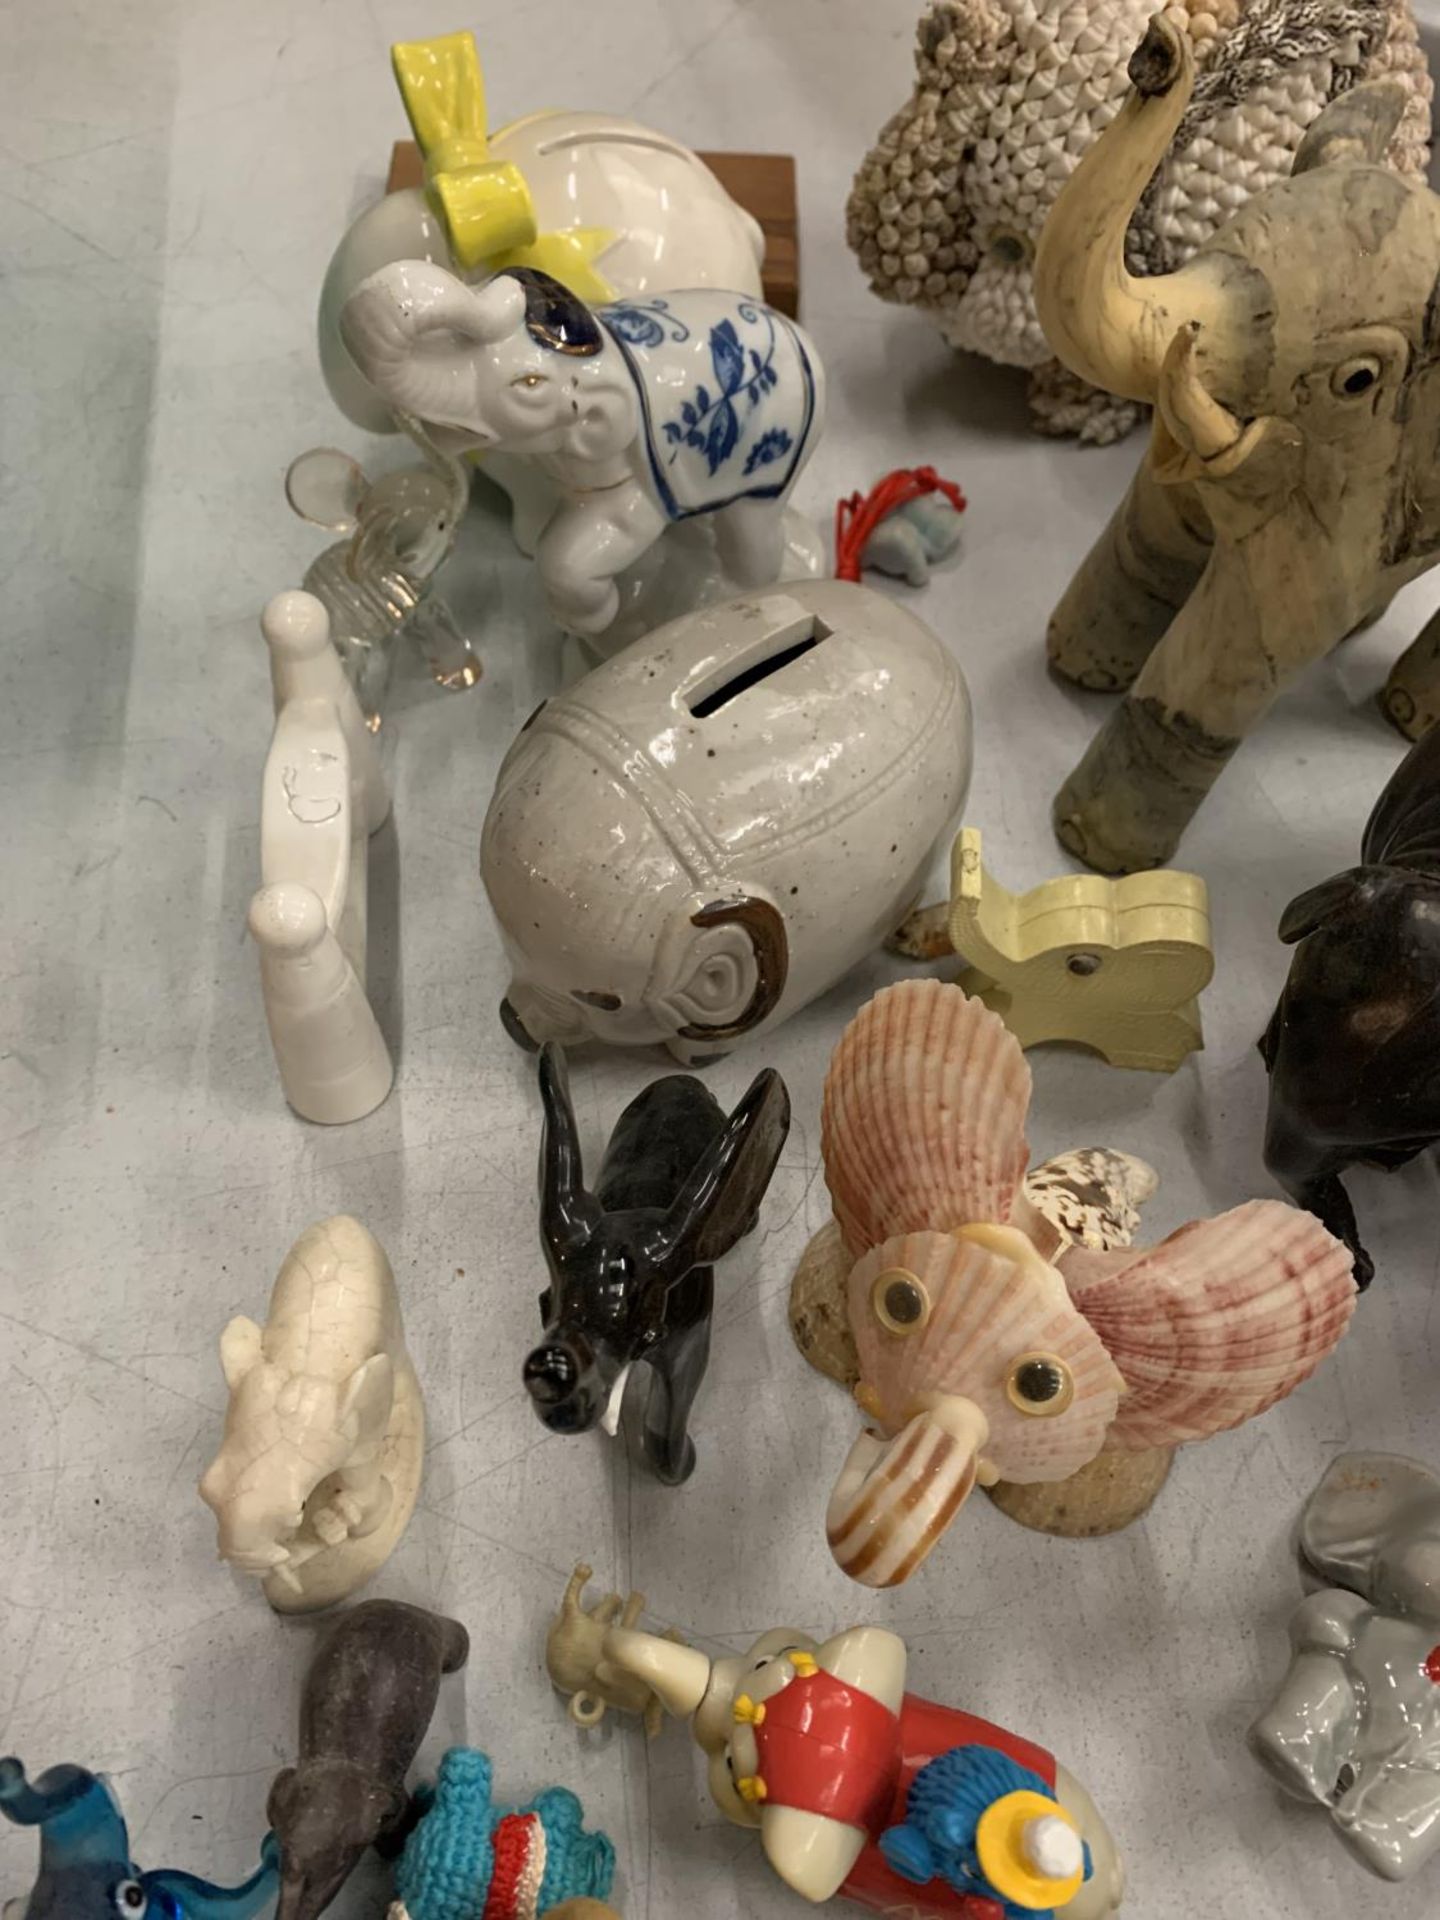 A LARGE QUANTITY OF COLLECTABLE ELEPHANTS OF ALL SIZES, INCLUDES, CERAMIC, WOODEN, ETC - Image 5 of 8